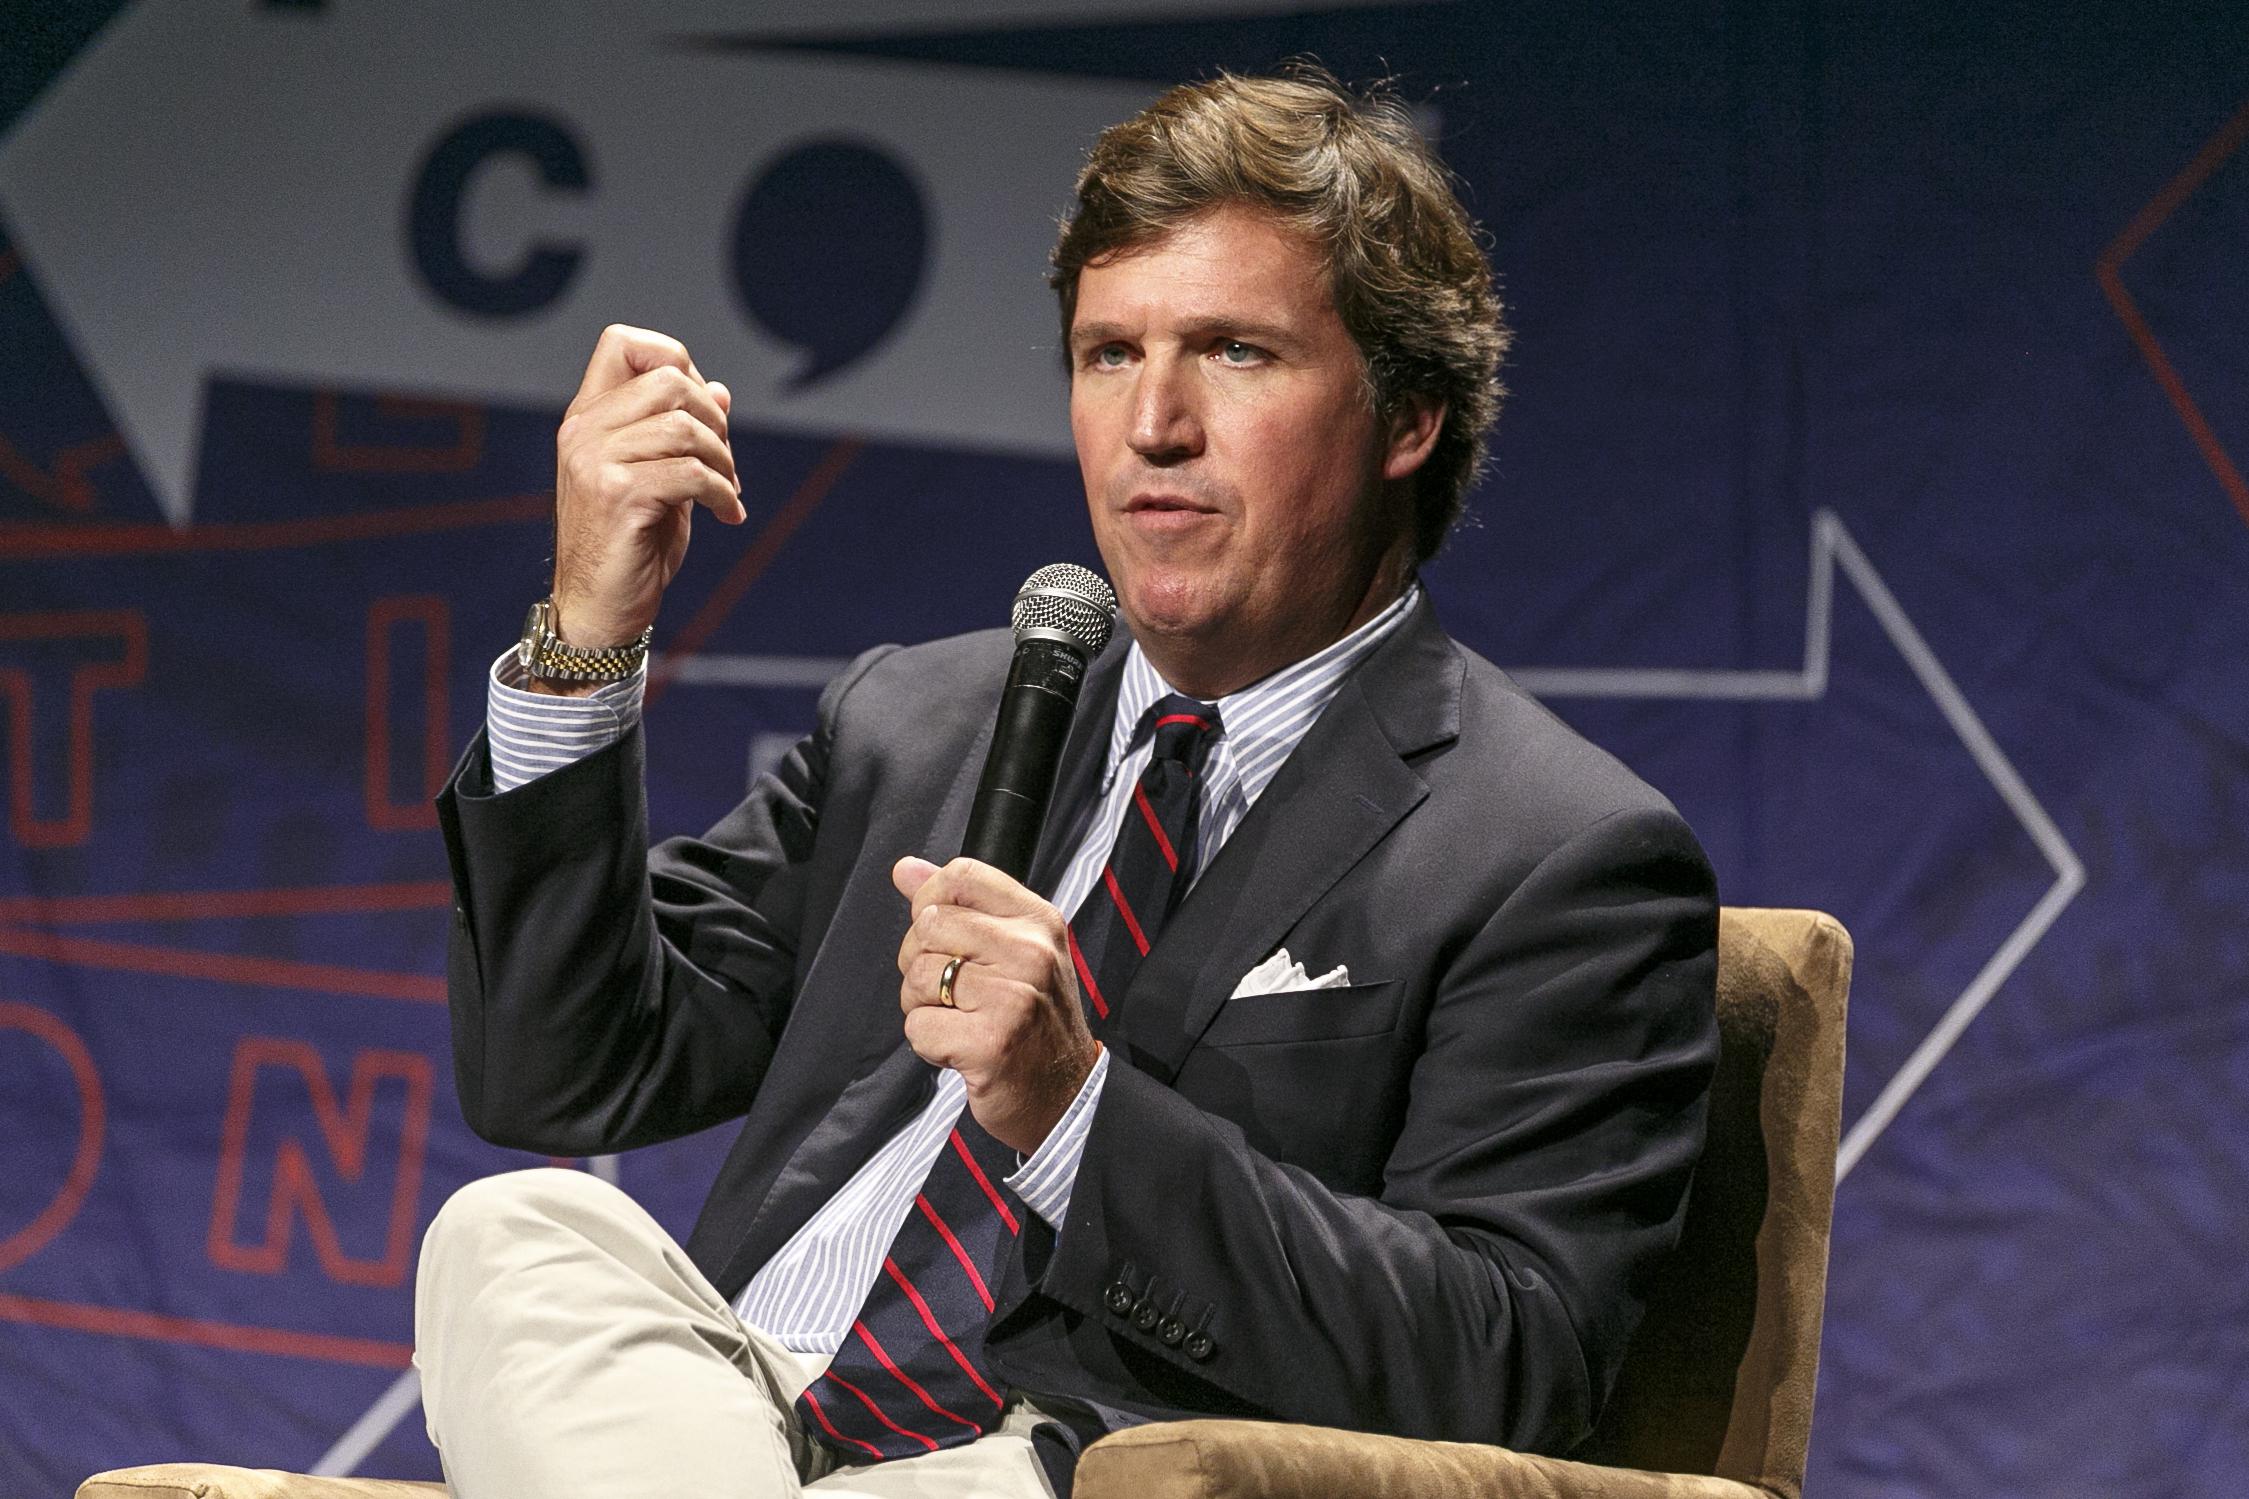 Tucker Carlson speaks onstage from a chair.